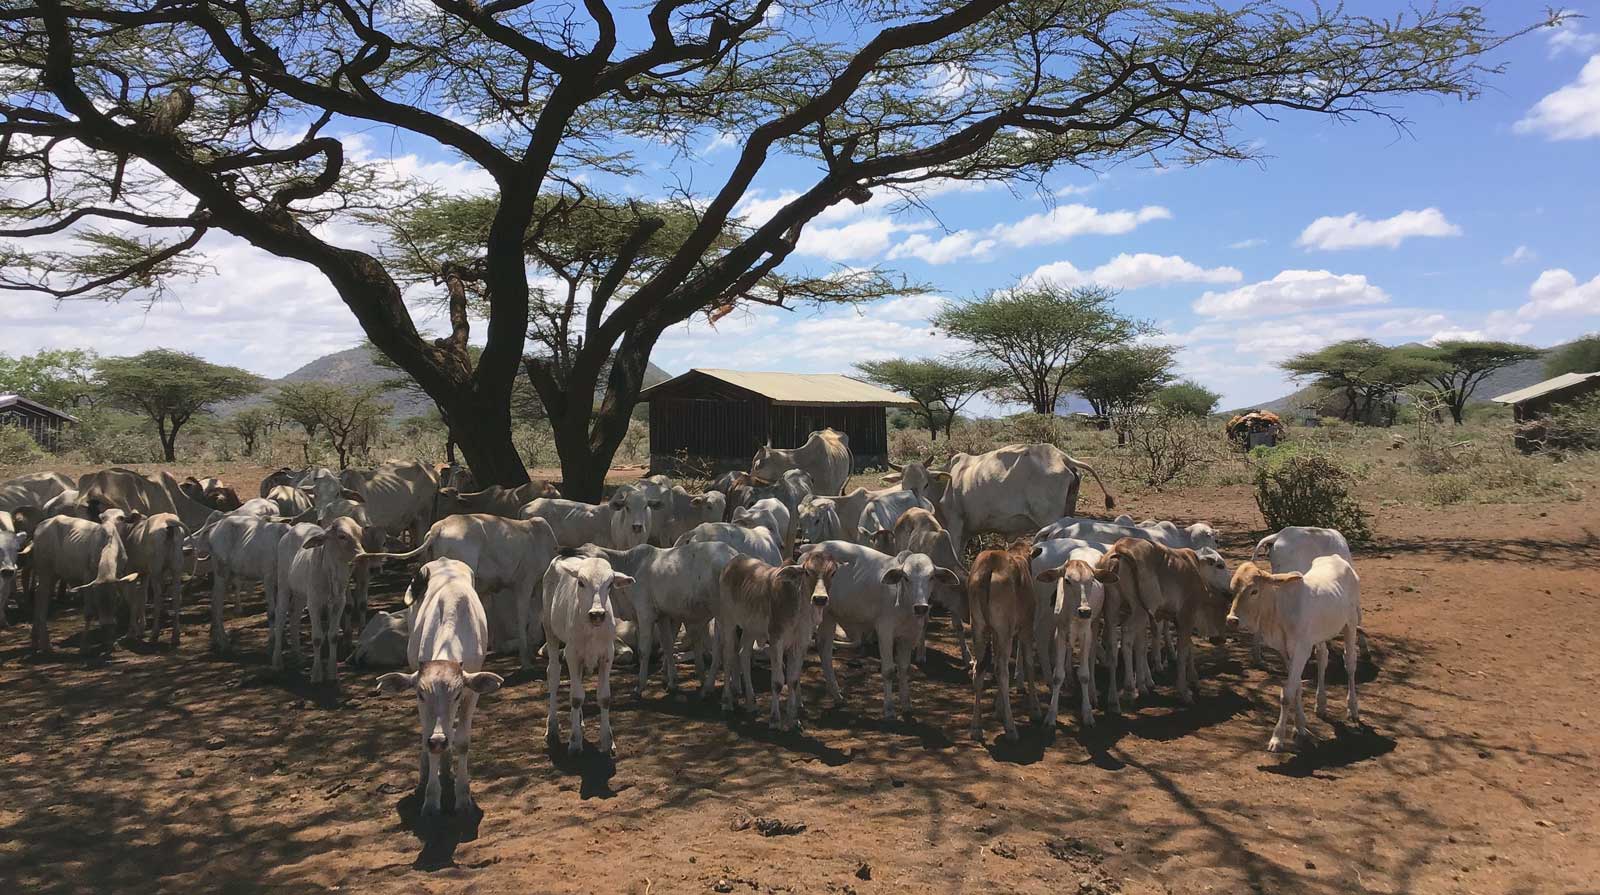 Local pastoralist communities keep cows, sheep, and camels for livelihood.